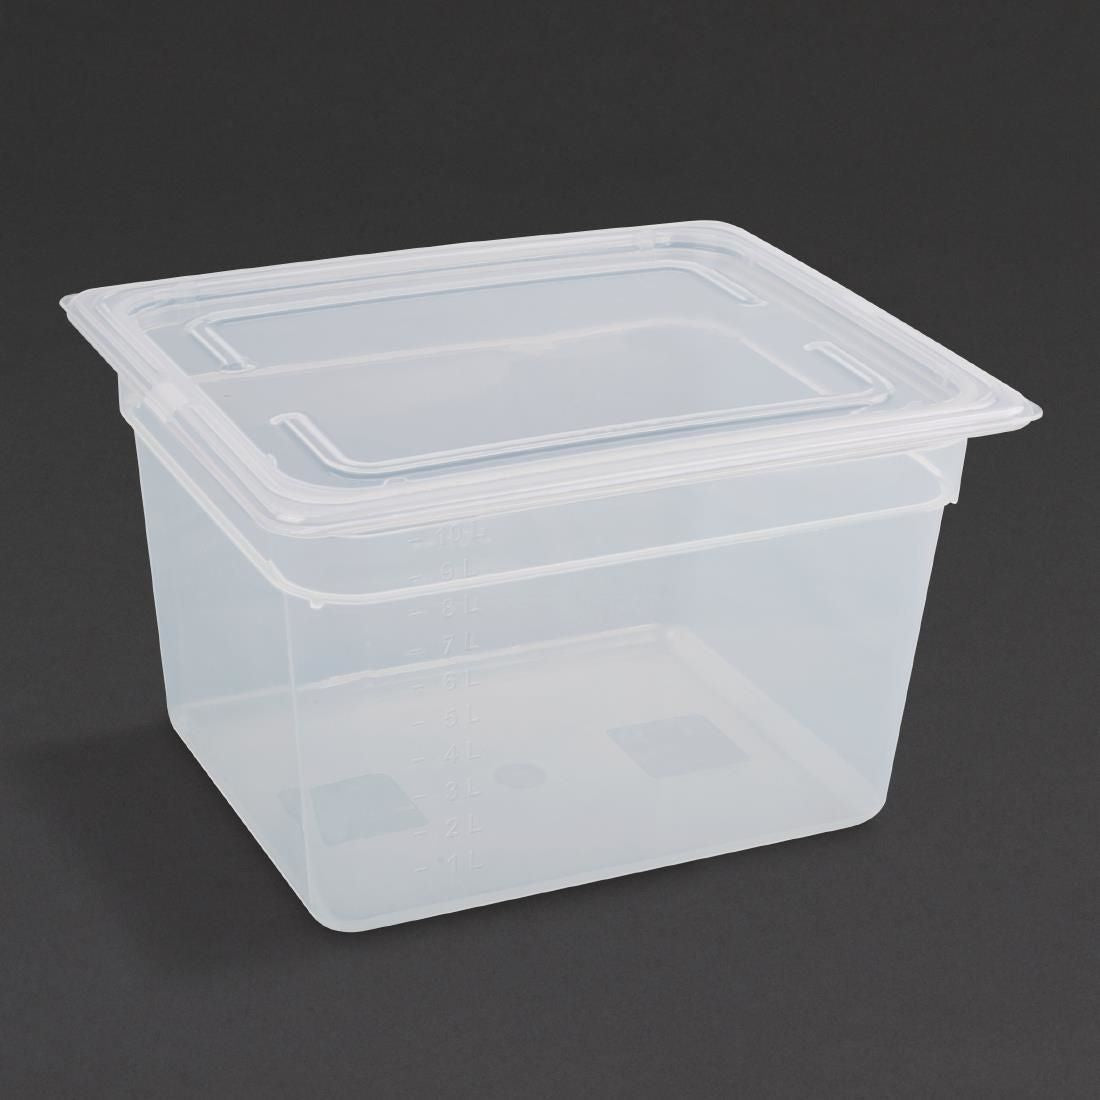 GJ517 Vogue Polypropylene 1/2 Gastronorm Container with Lid 200mm (Pack of 4) JD Catering Equipment Solutions Ltd